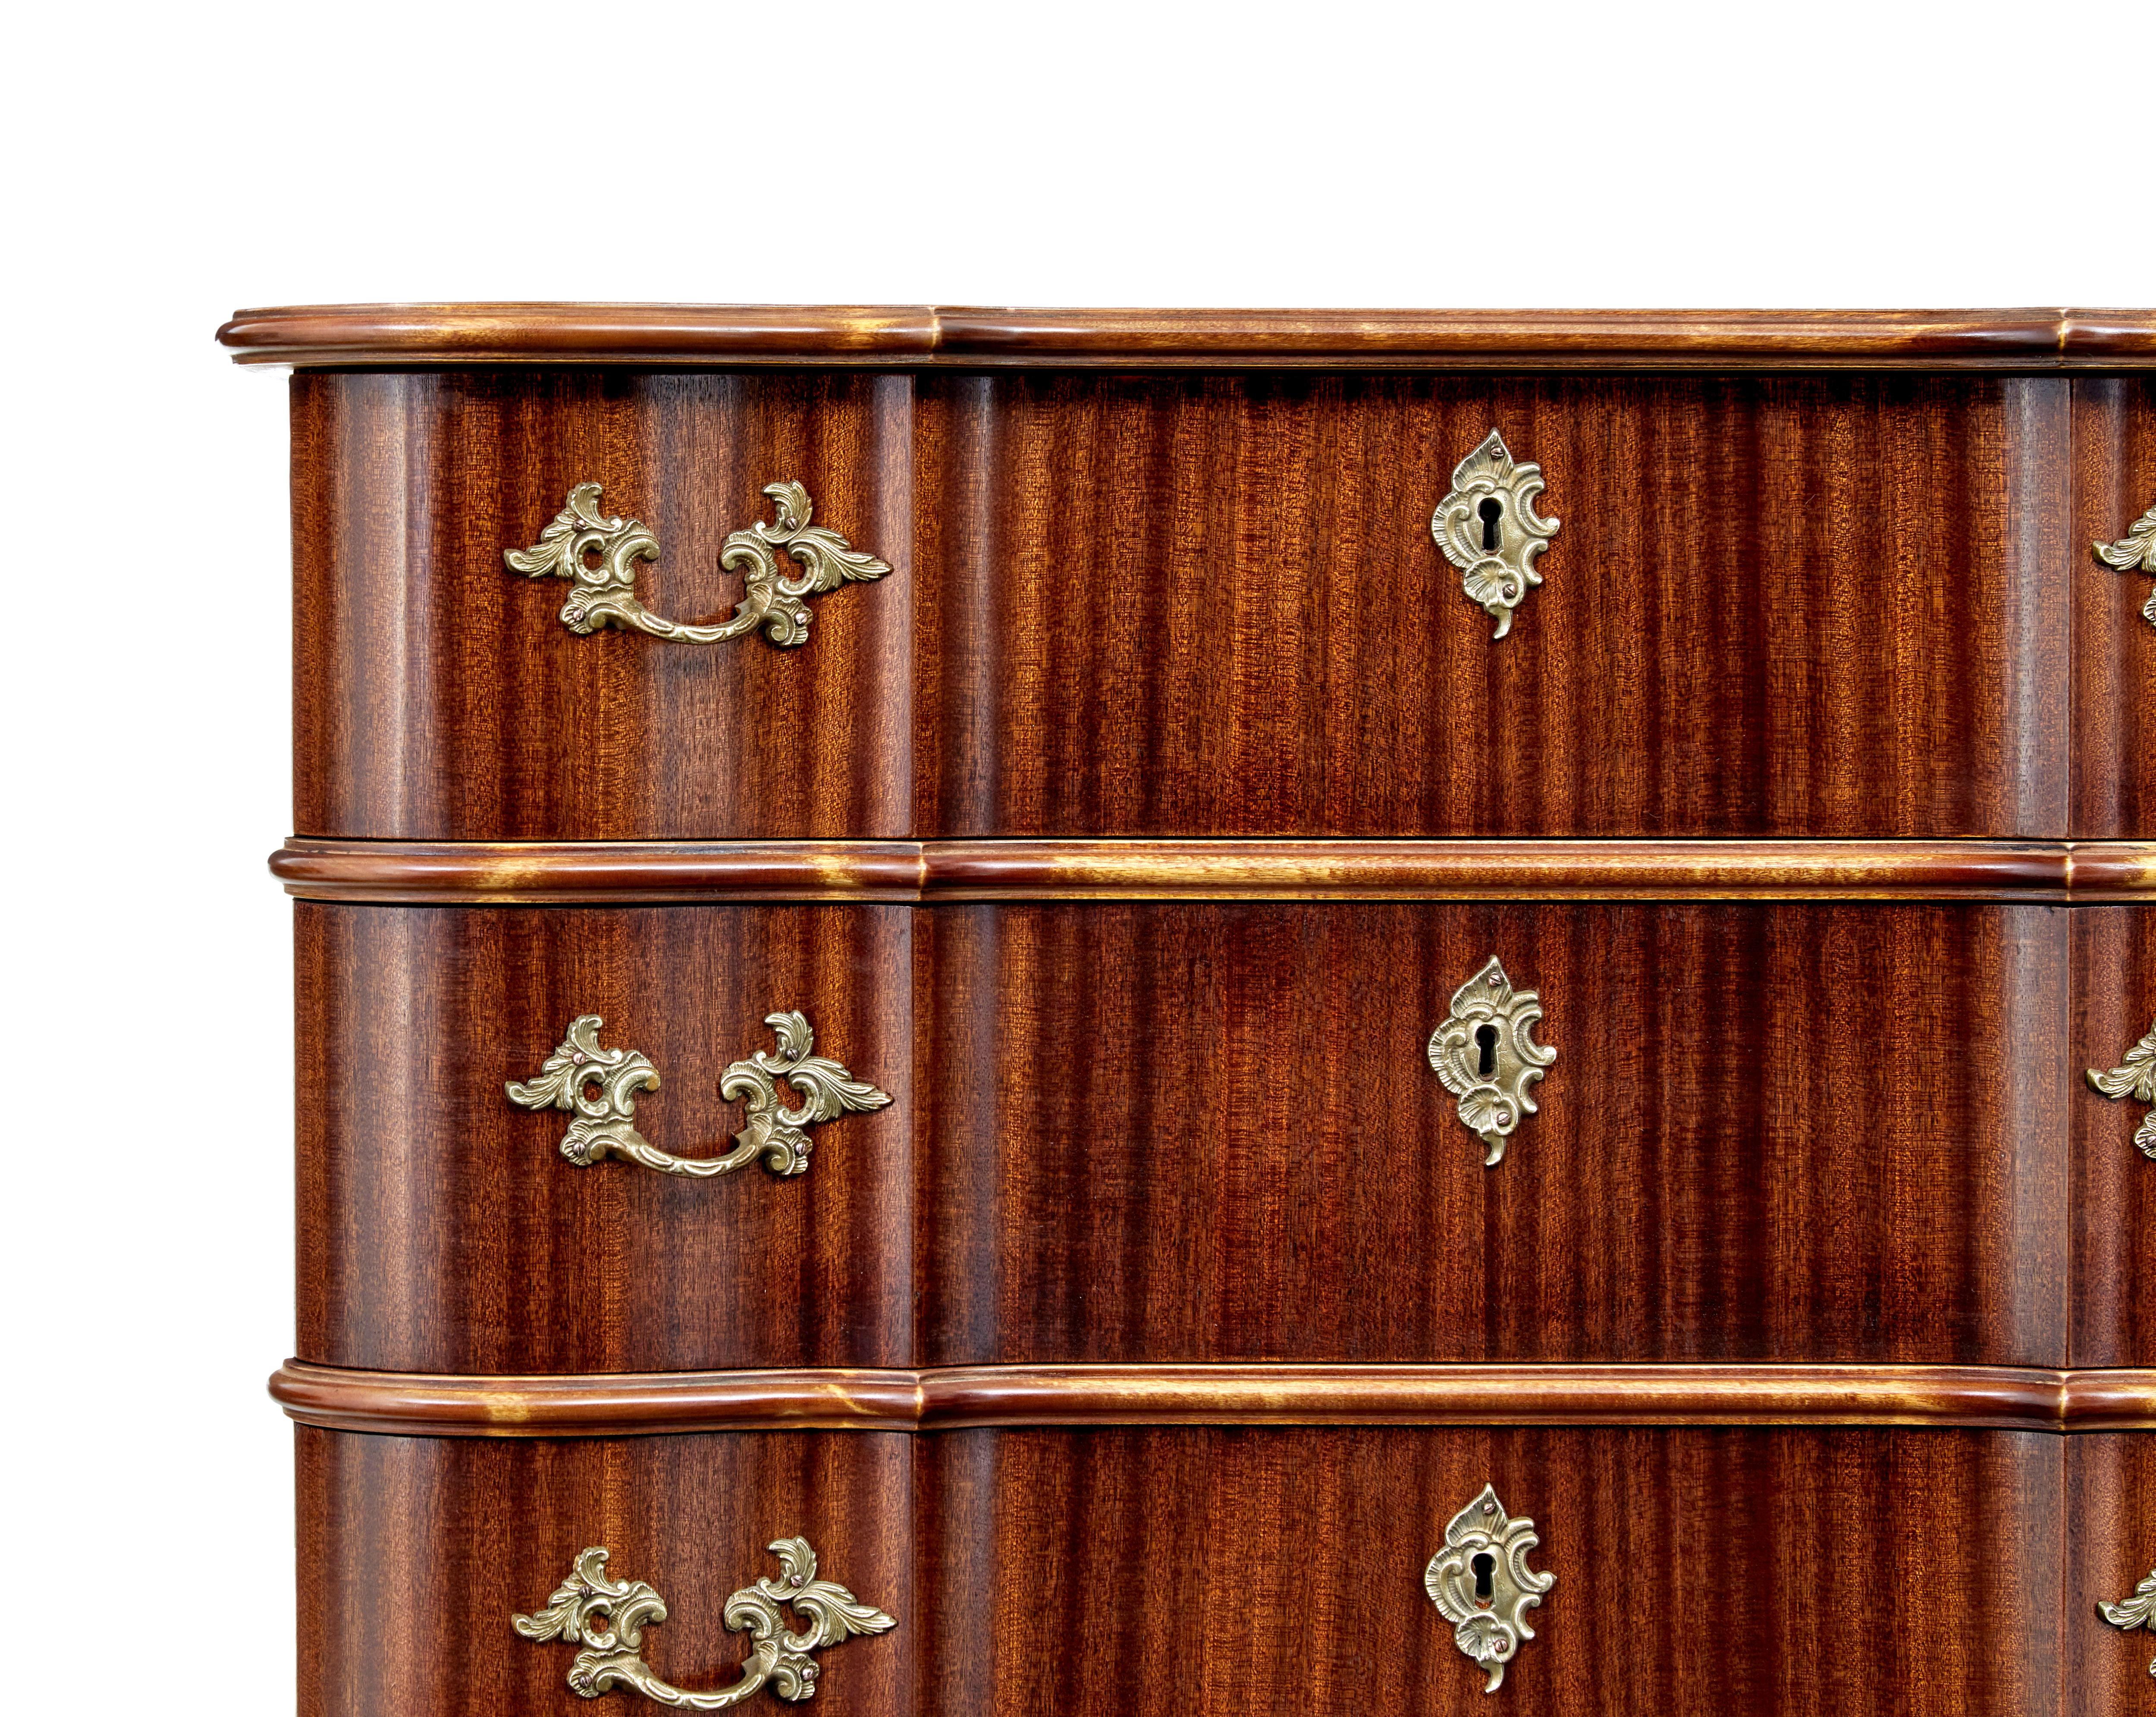 Scandinavian Midcentury Baroque Revival Chest of Drawers In Good Condition For Sale In Debenham, Suffolk